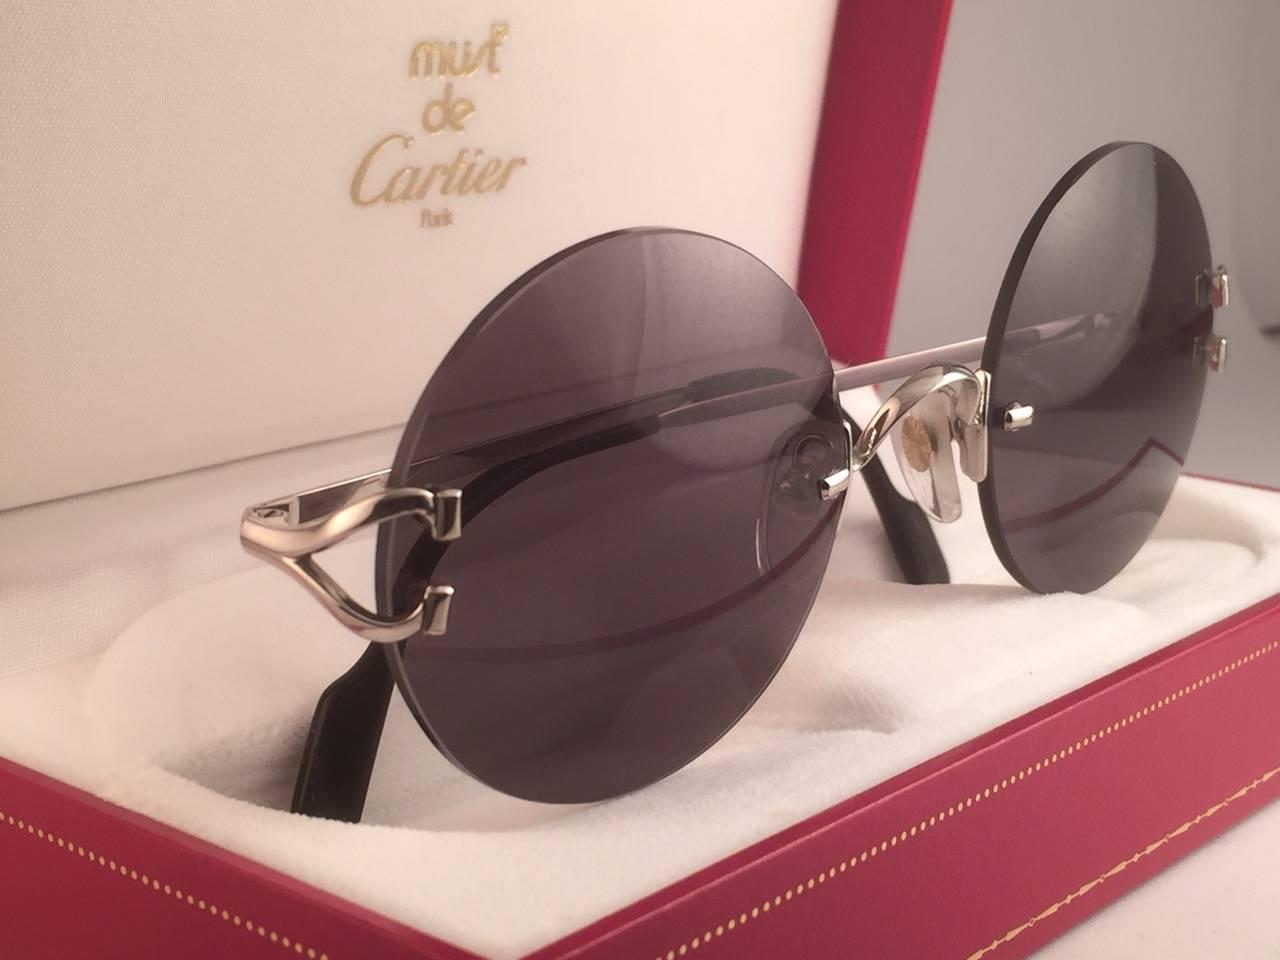 New 1990 Cartier Madison unique rimless sunglasses with grey (uv protection) lenses. 
Frame with the front and sides in Platine. 
Cartier Platine signs on the onyx black ear paddles. 
These are like a pair of jewels on your nose. 
Beautiful design